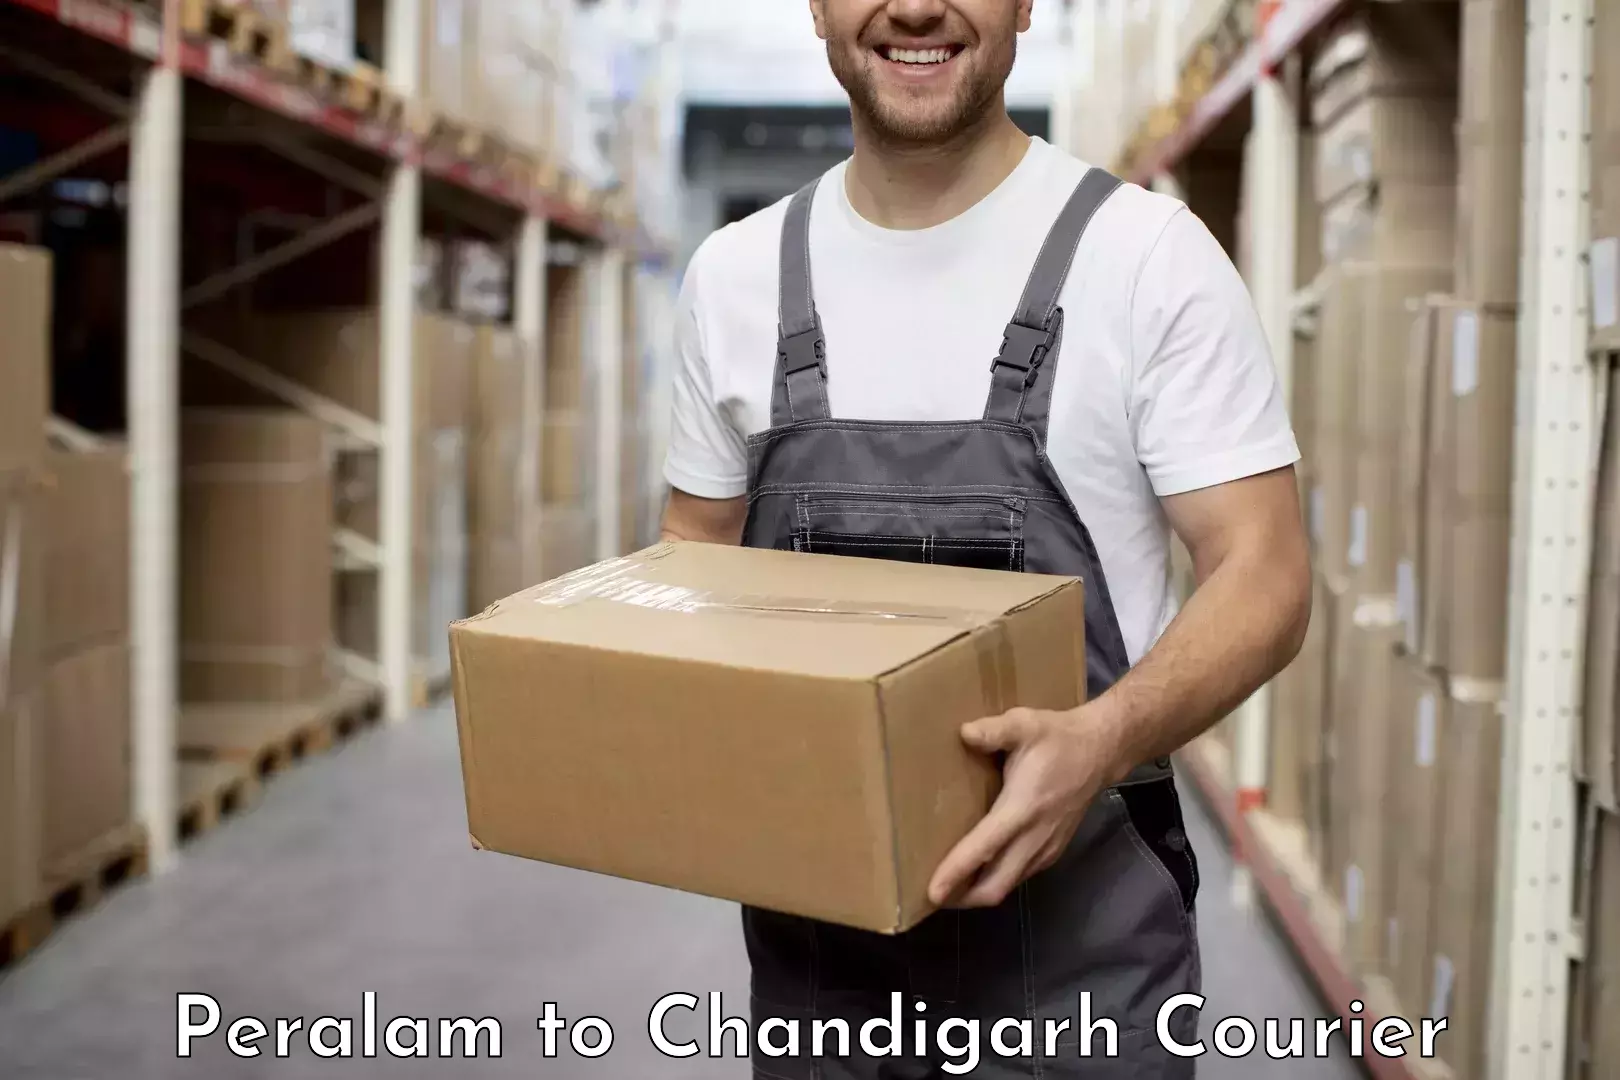 Global shipping networks Peralam to Chandigarh